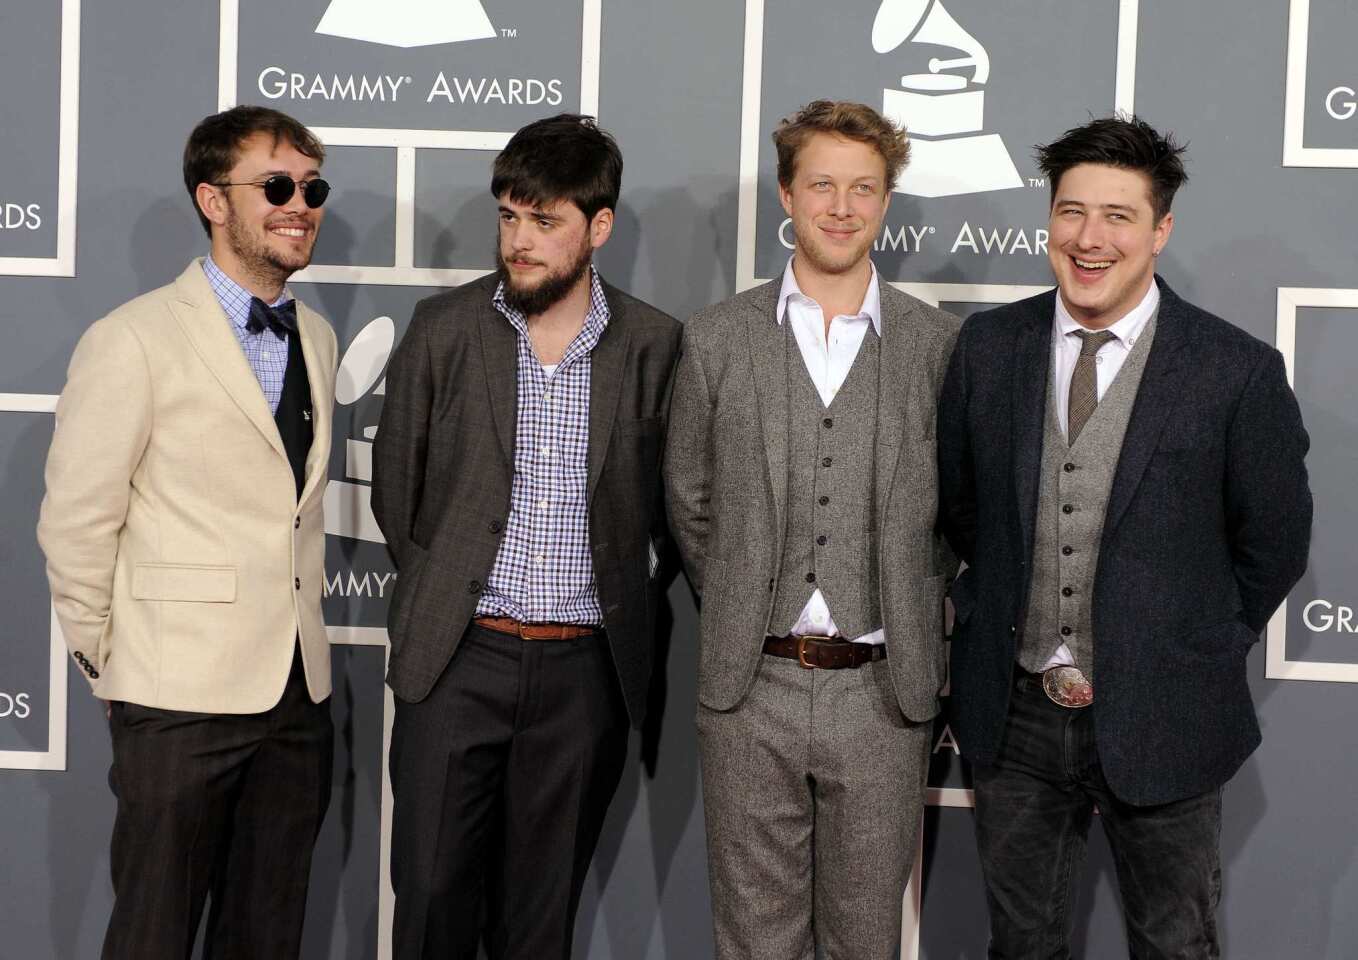 Record of the year nominees Mumford & Sons.